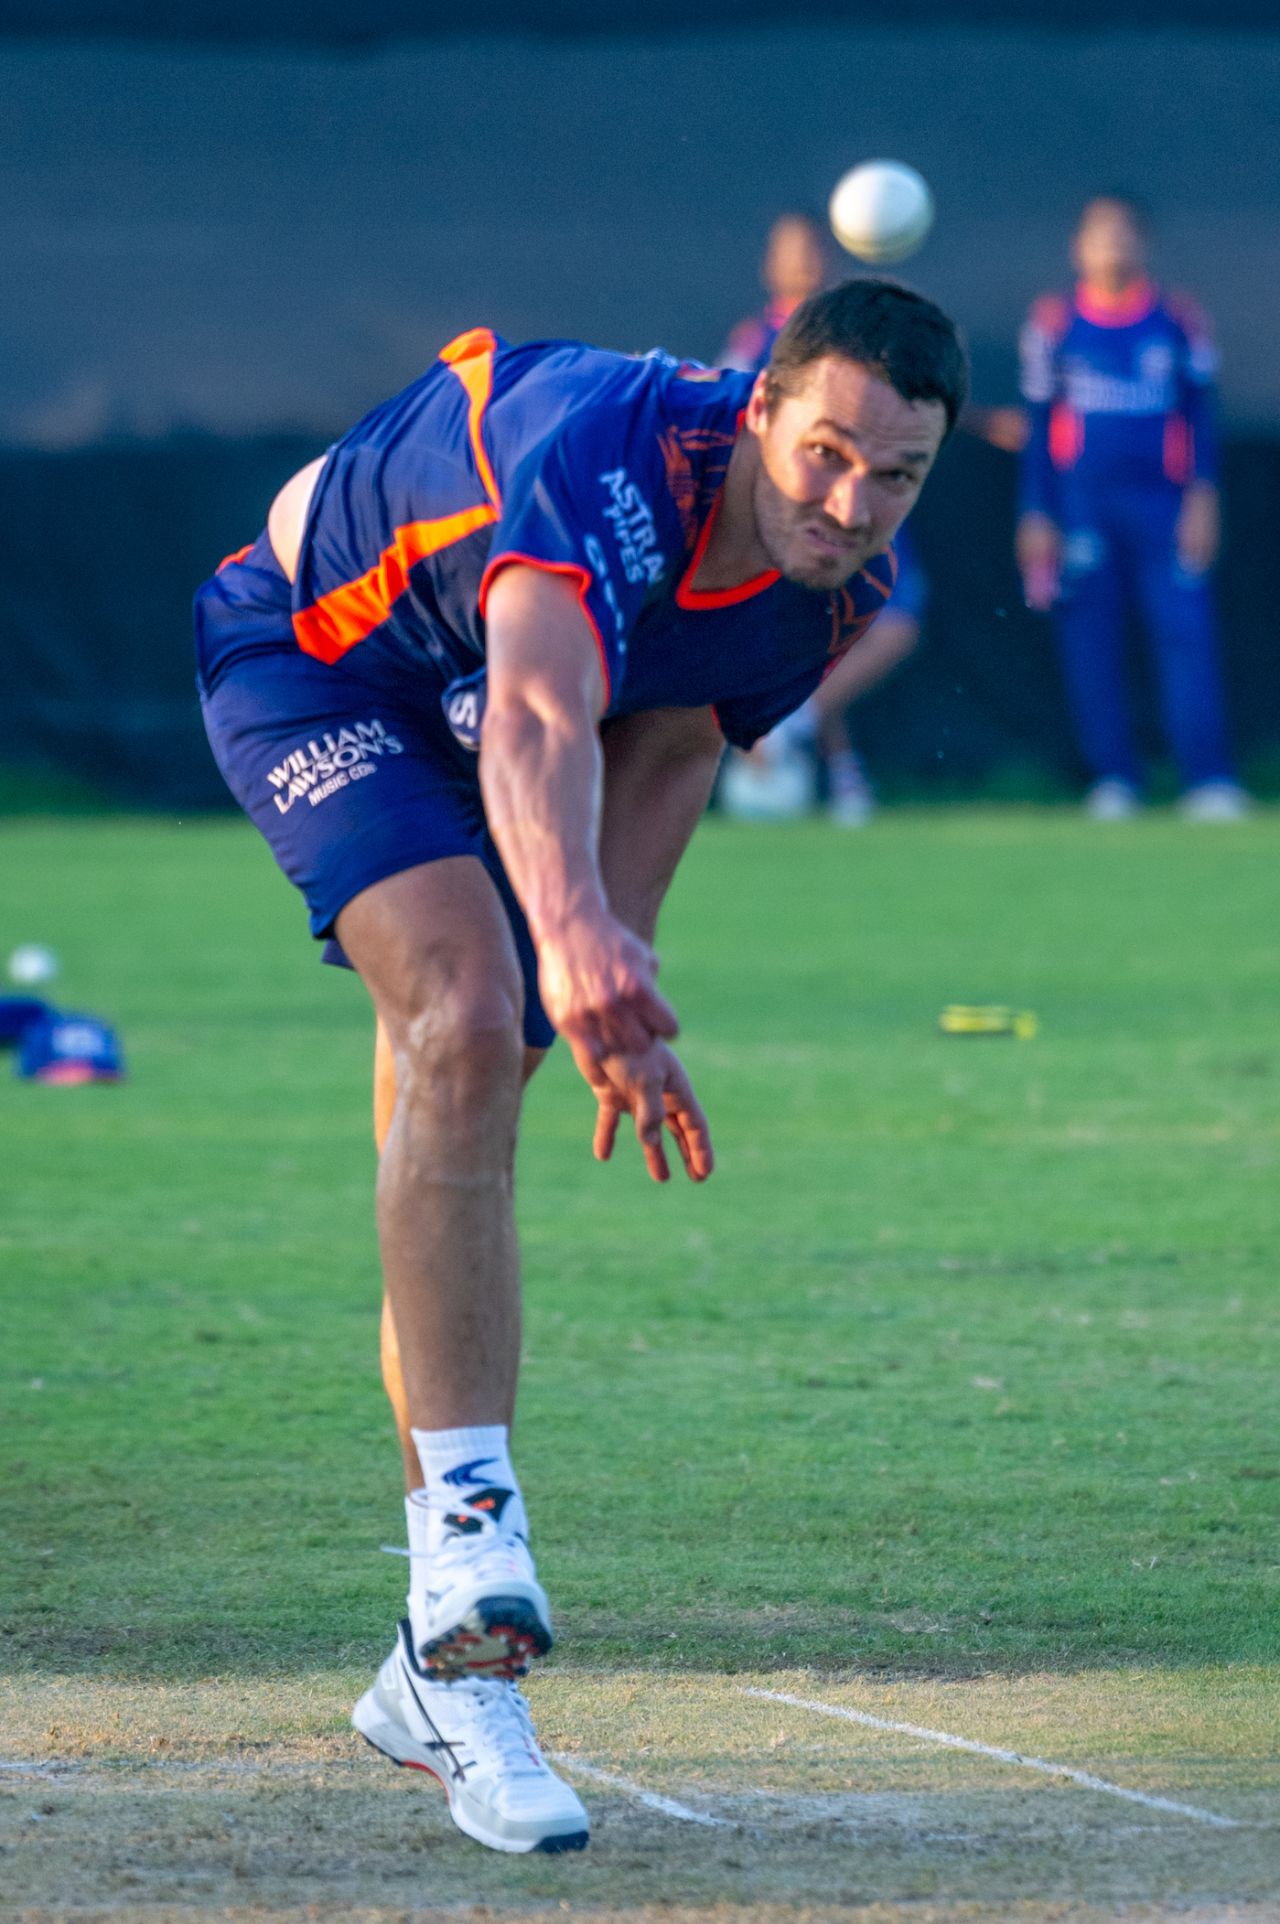 Nathan Coulter-Nile trained on Tuesday after missing the first match, IPL 2020, Abu Dhabi, September 22, 2020 